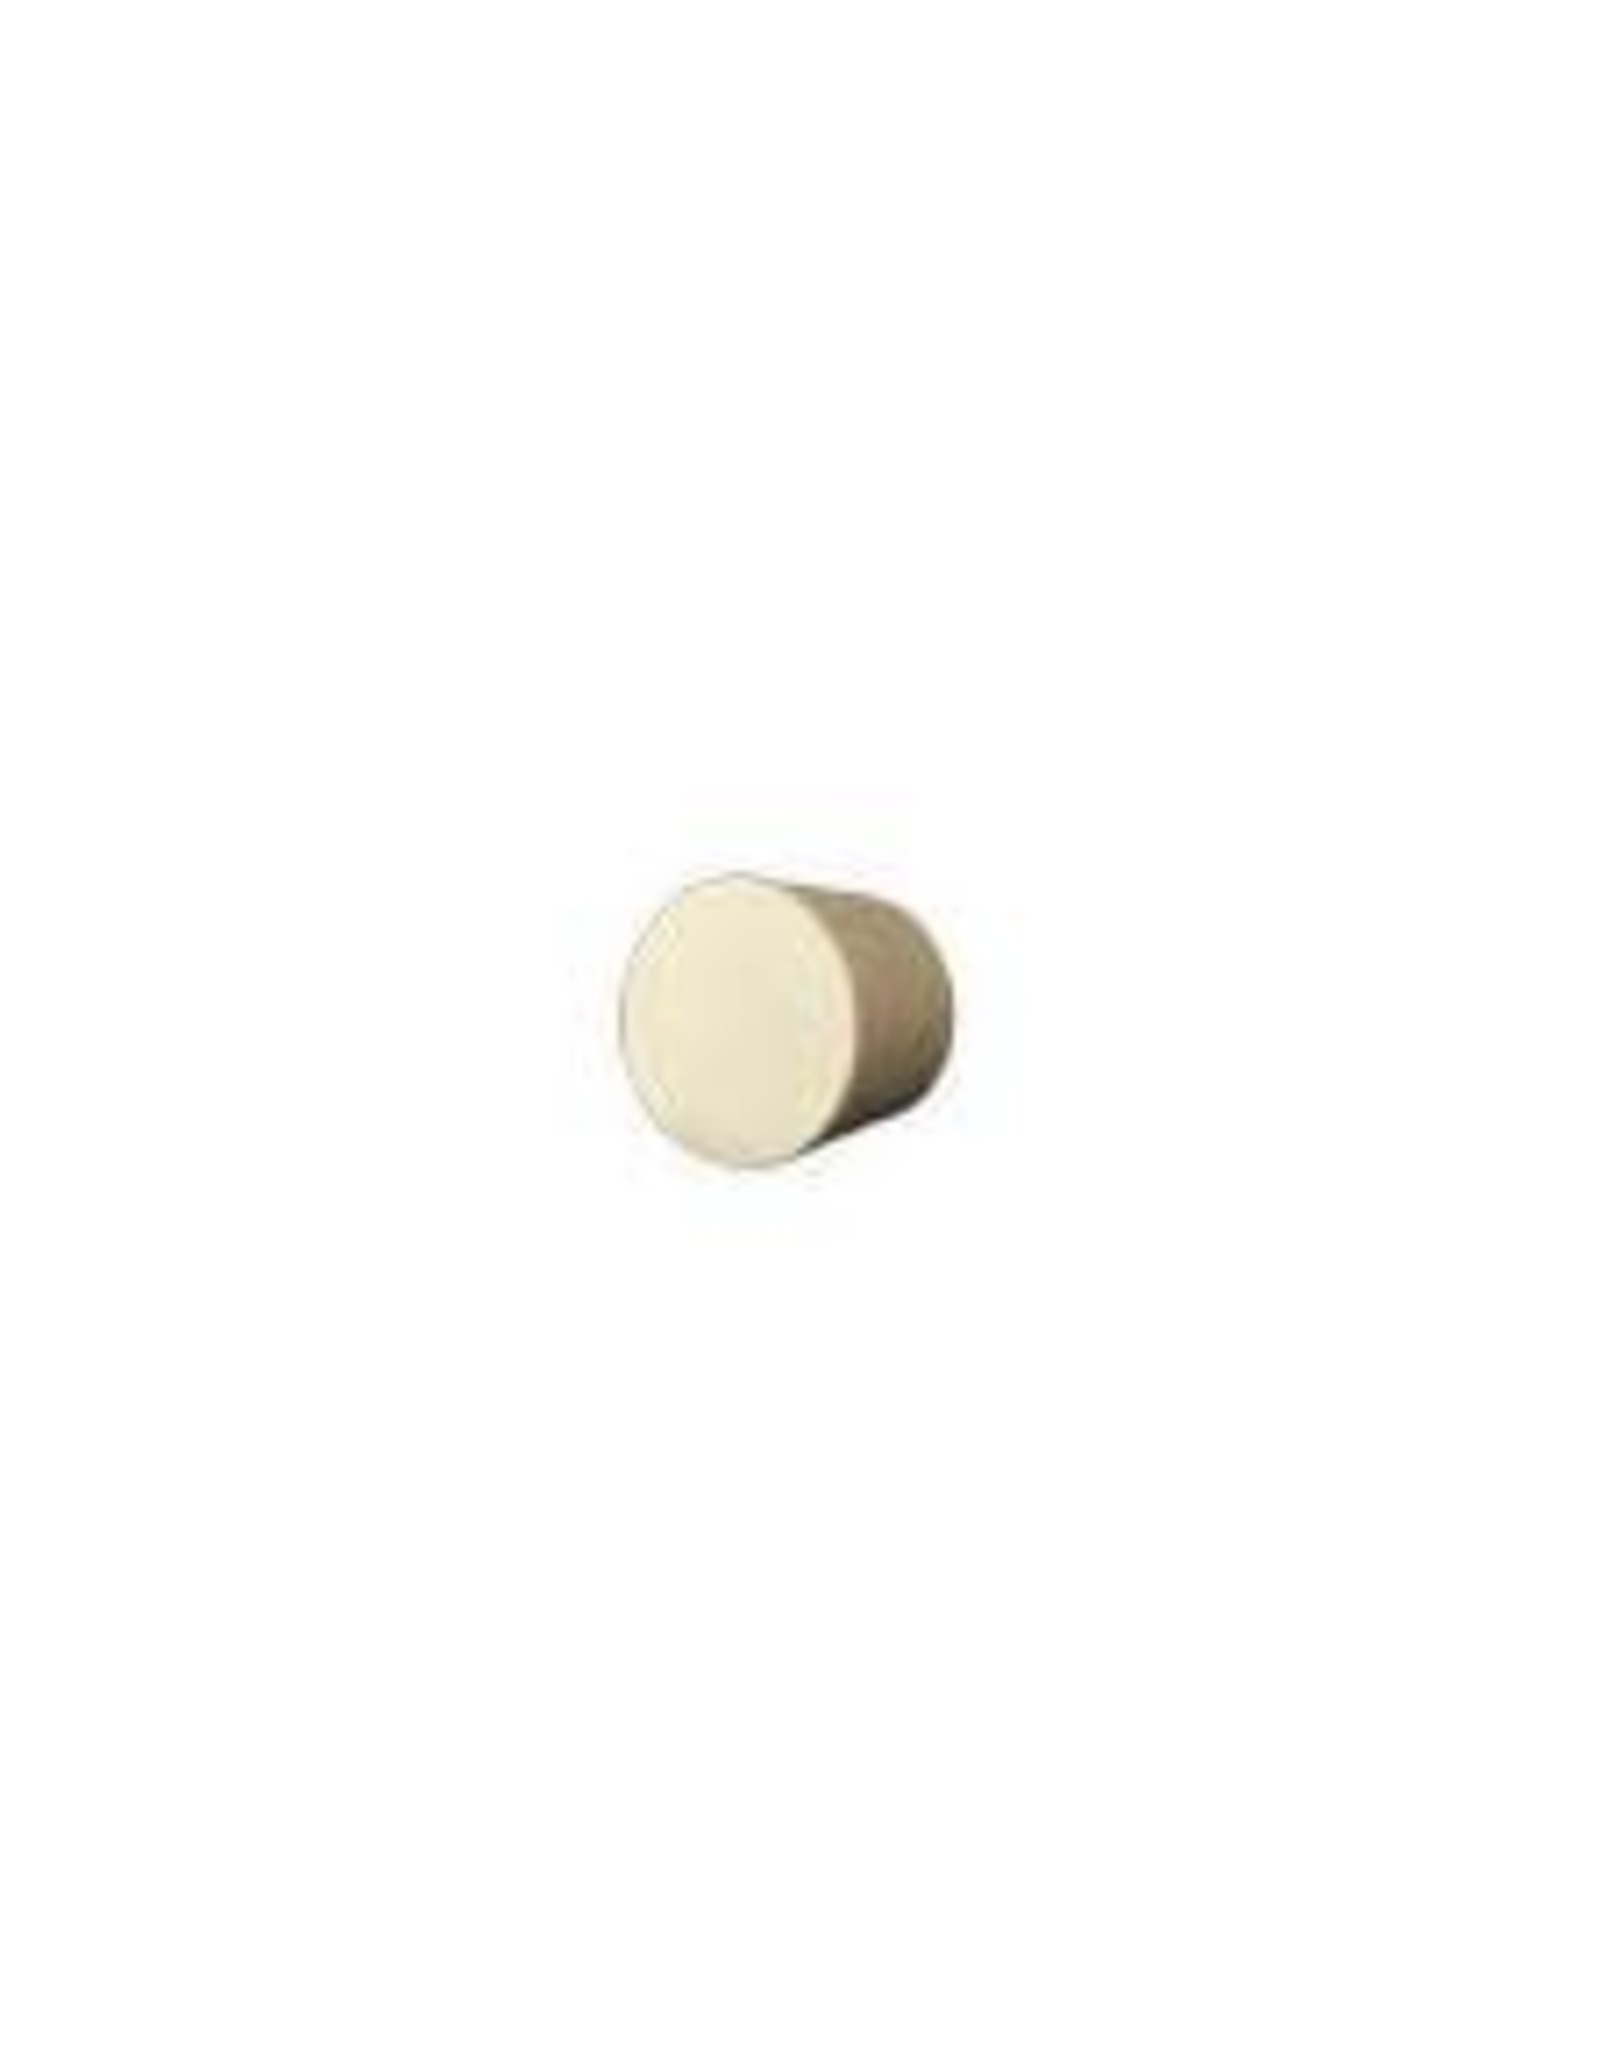 #6.5 SOLID RUBBER STOPPER